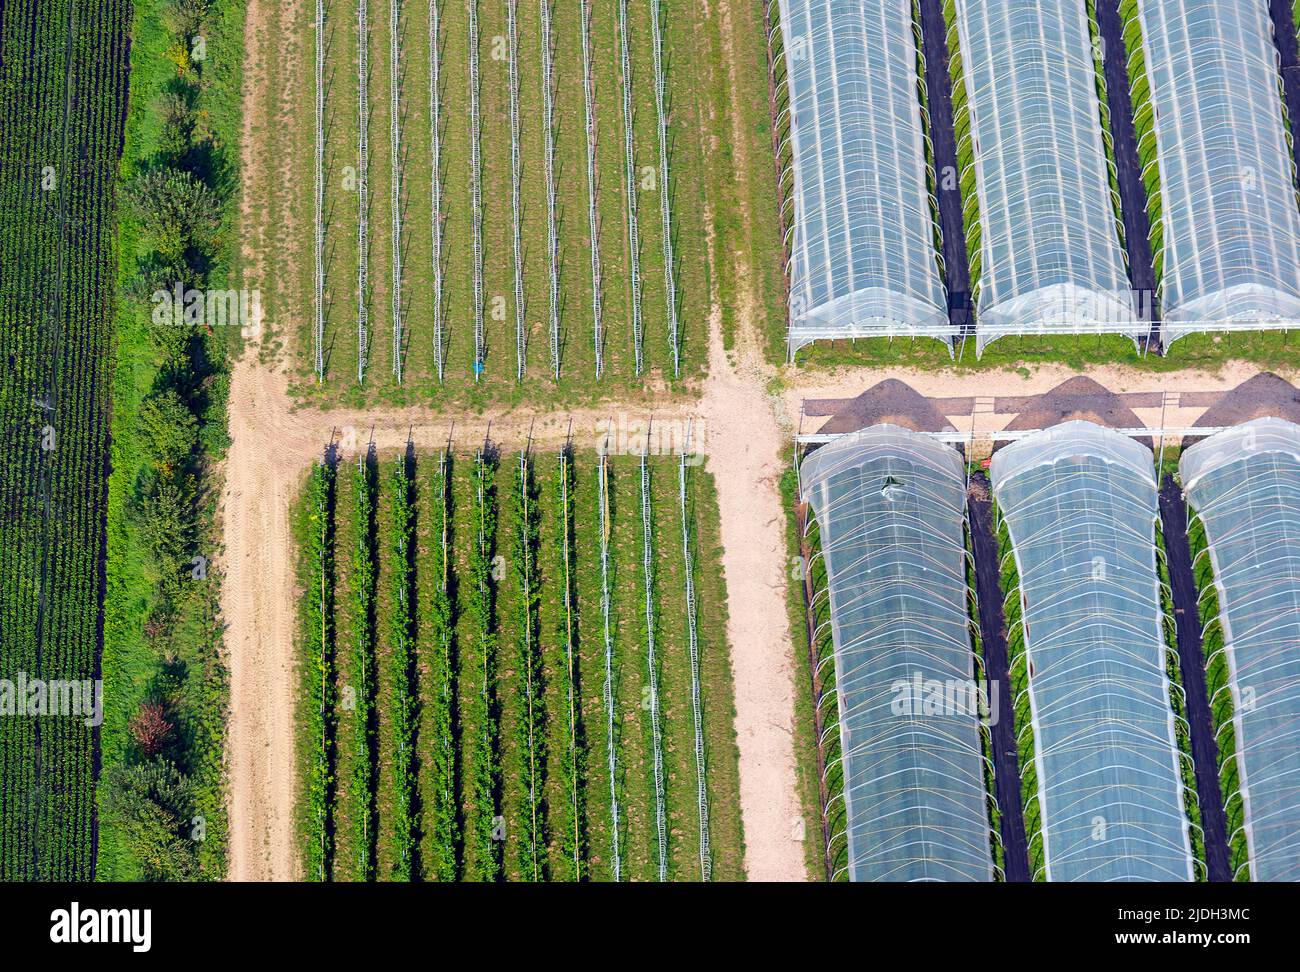 Cultivation under polytunnels and open land, aerial view 05/06/2022, Germany, Schleswig-Holstein Stock Photo